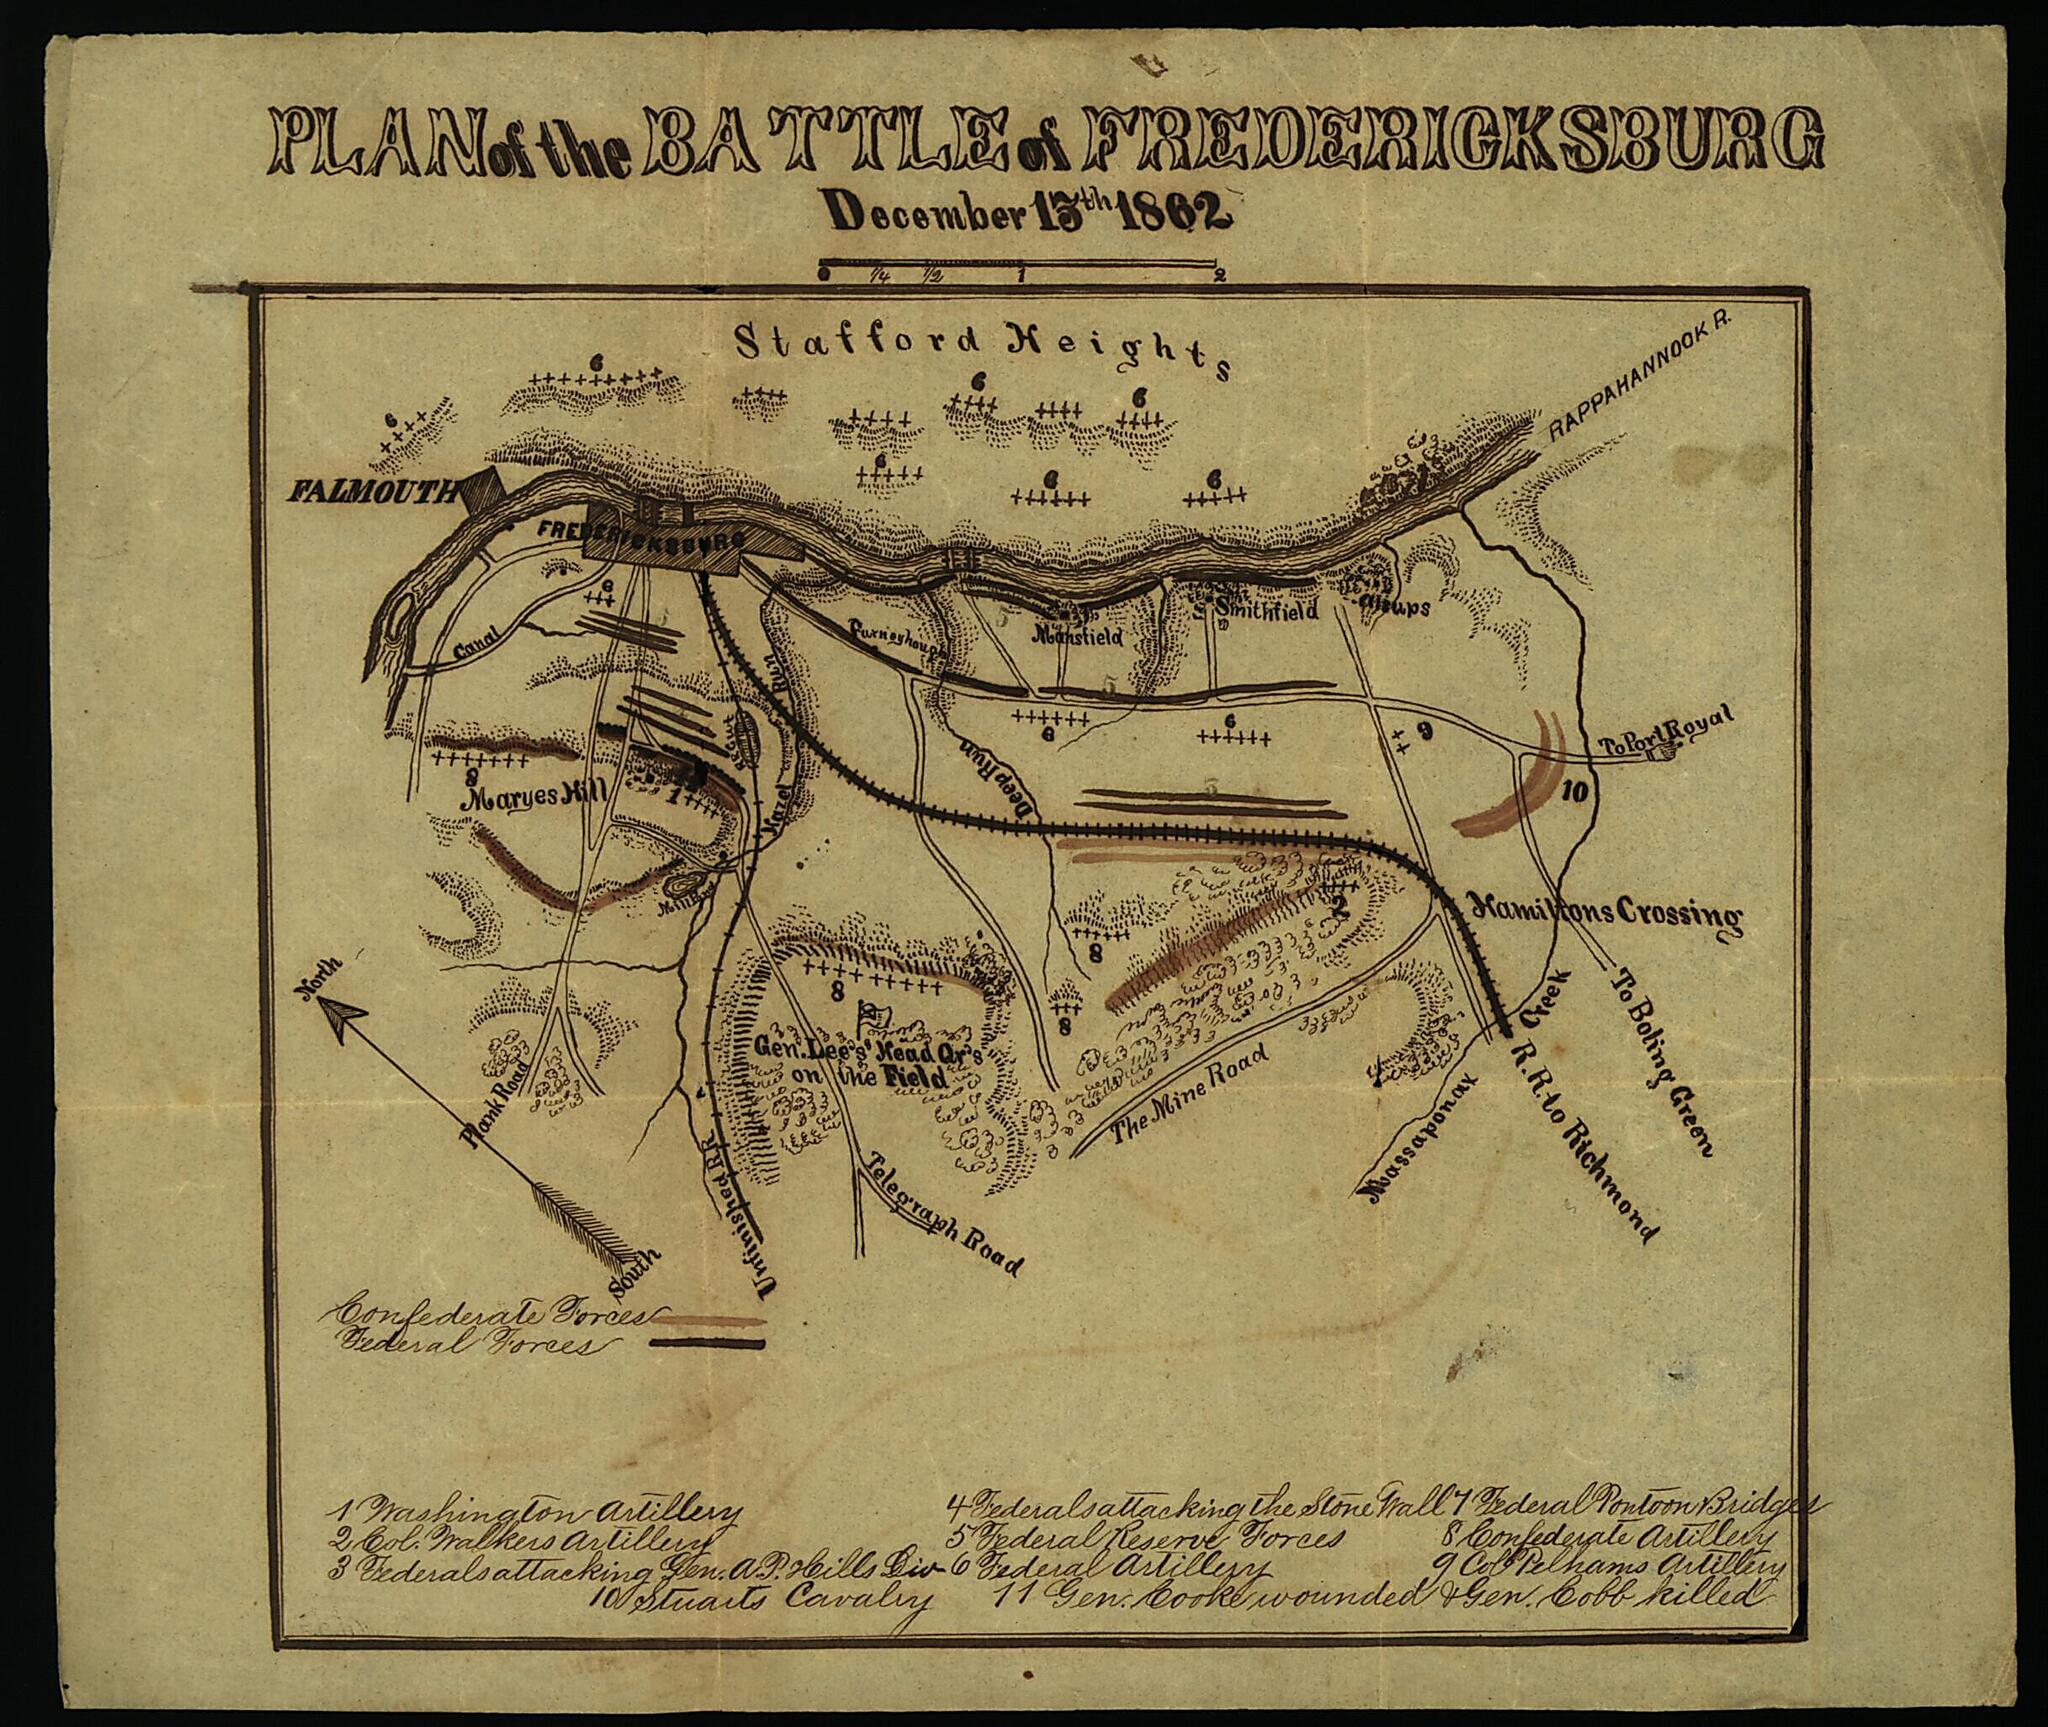 This old map of Plan of the Battle of Fredericksburg, December 13th, 1862 from 12-15 was created by  Cooke Family in 12-15